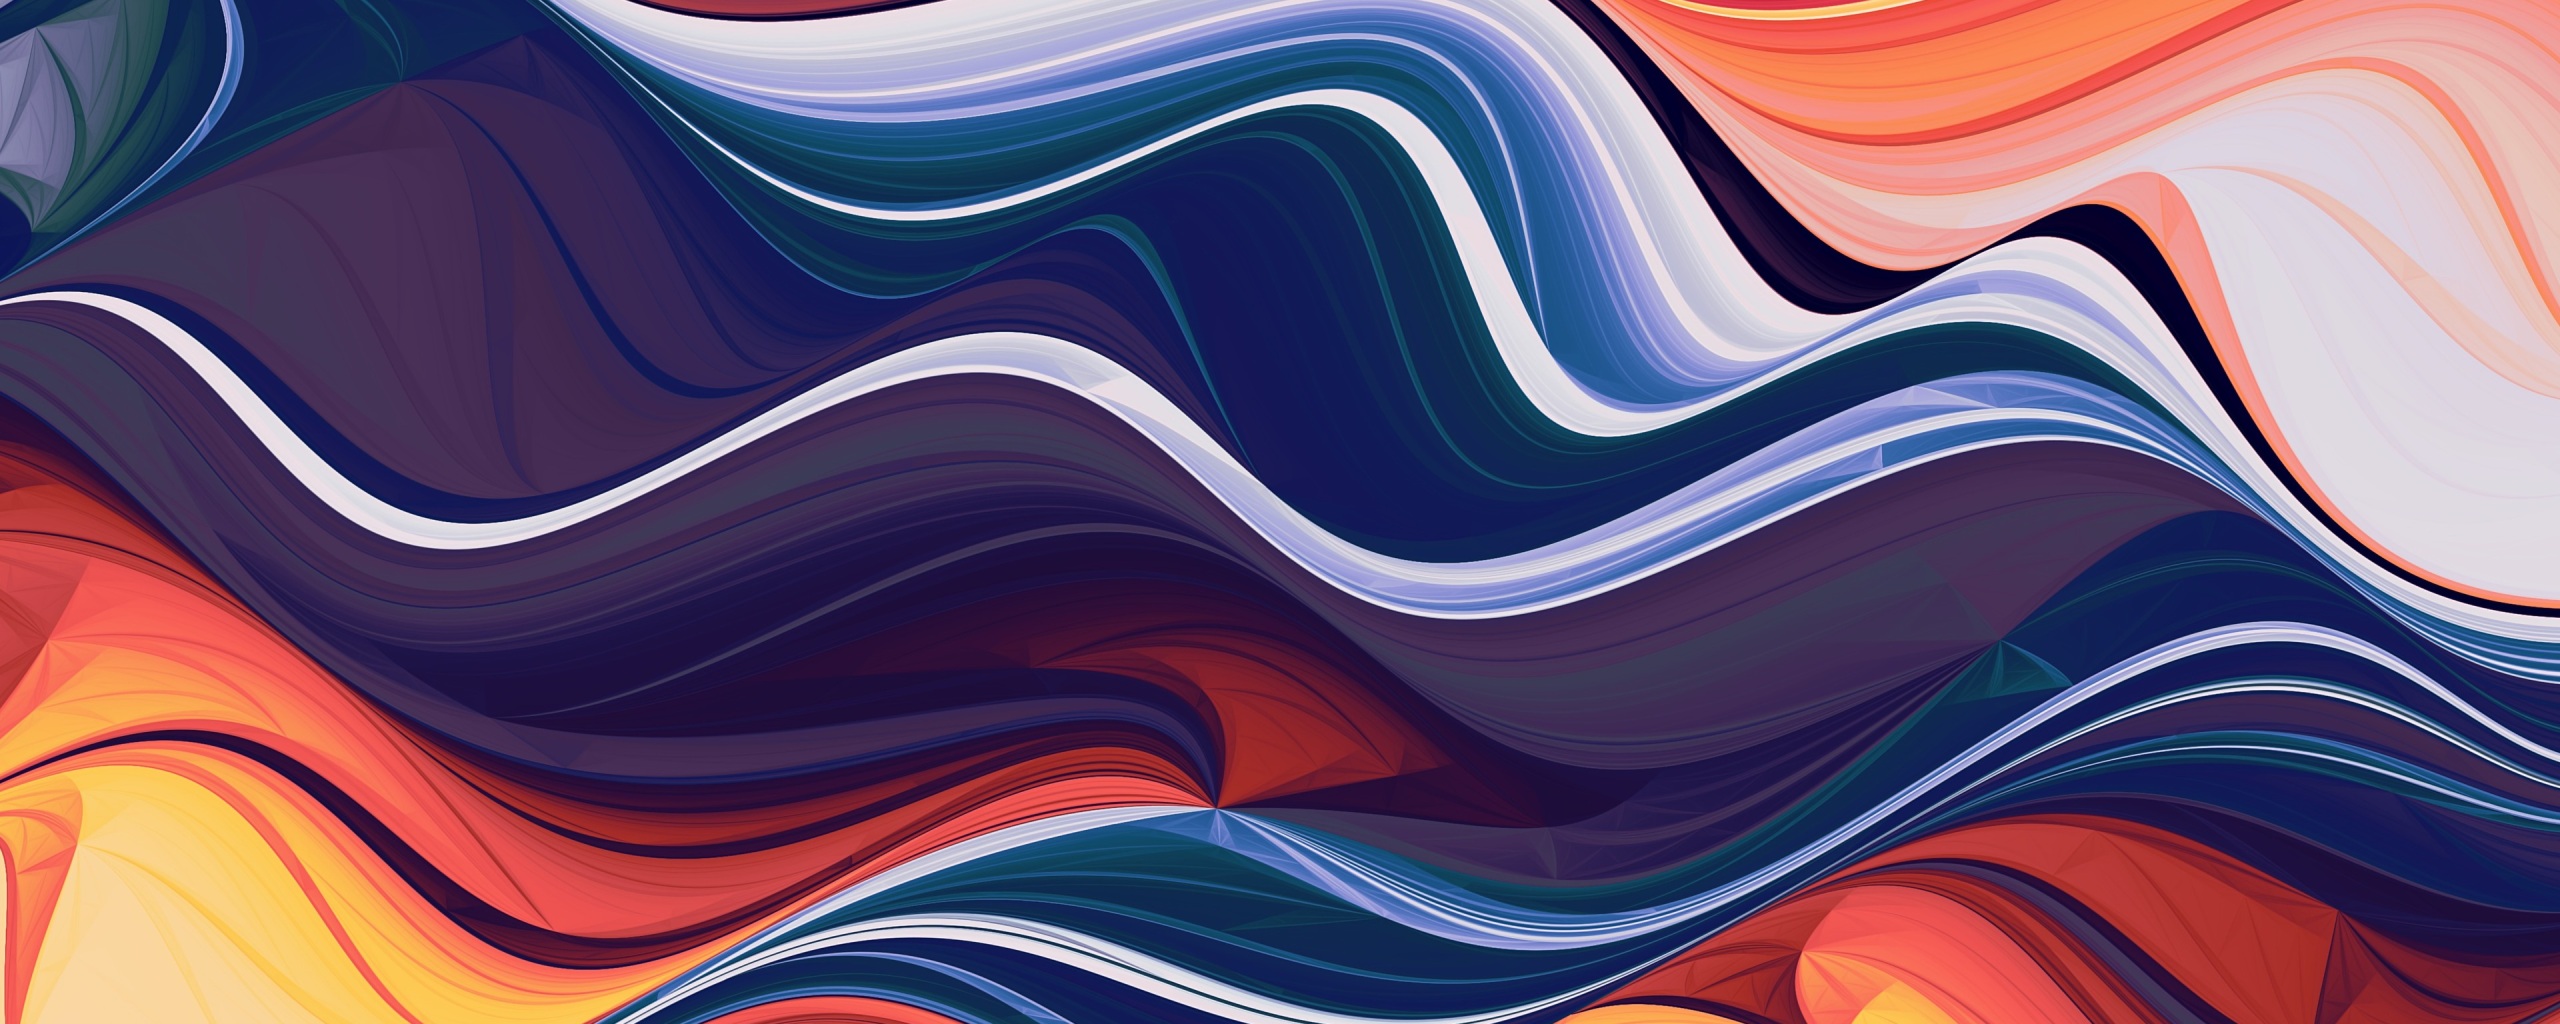 Colorful Abstraction Waves Wallpaper 4K